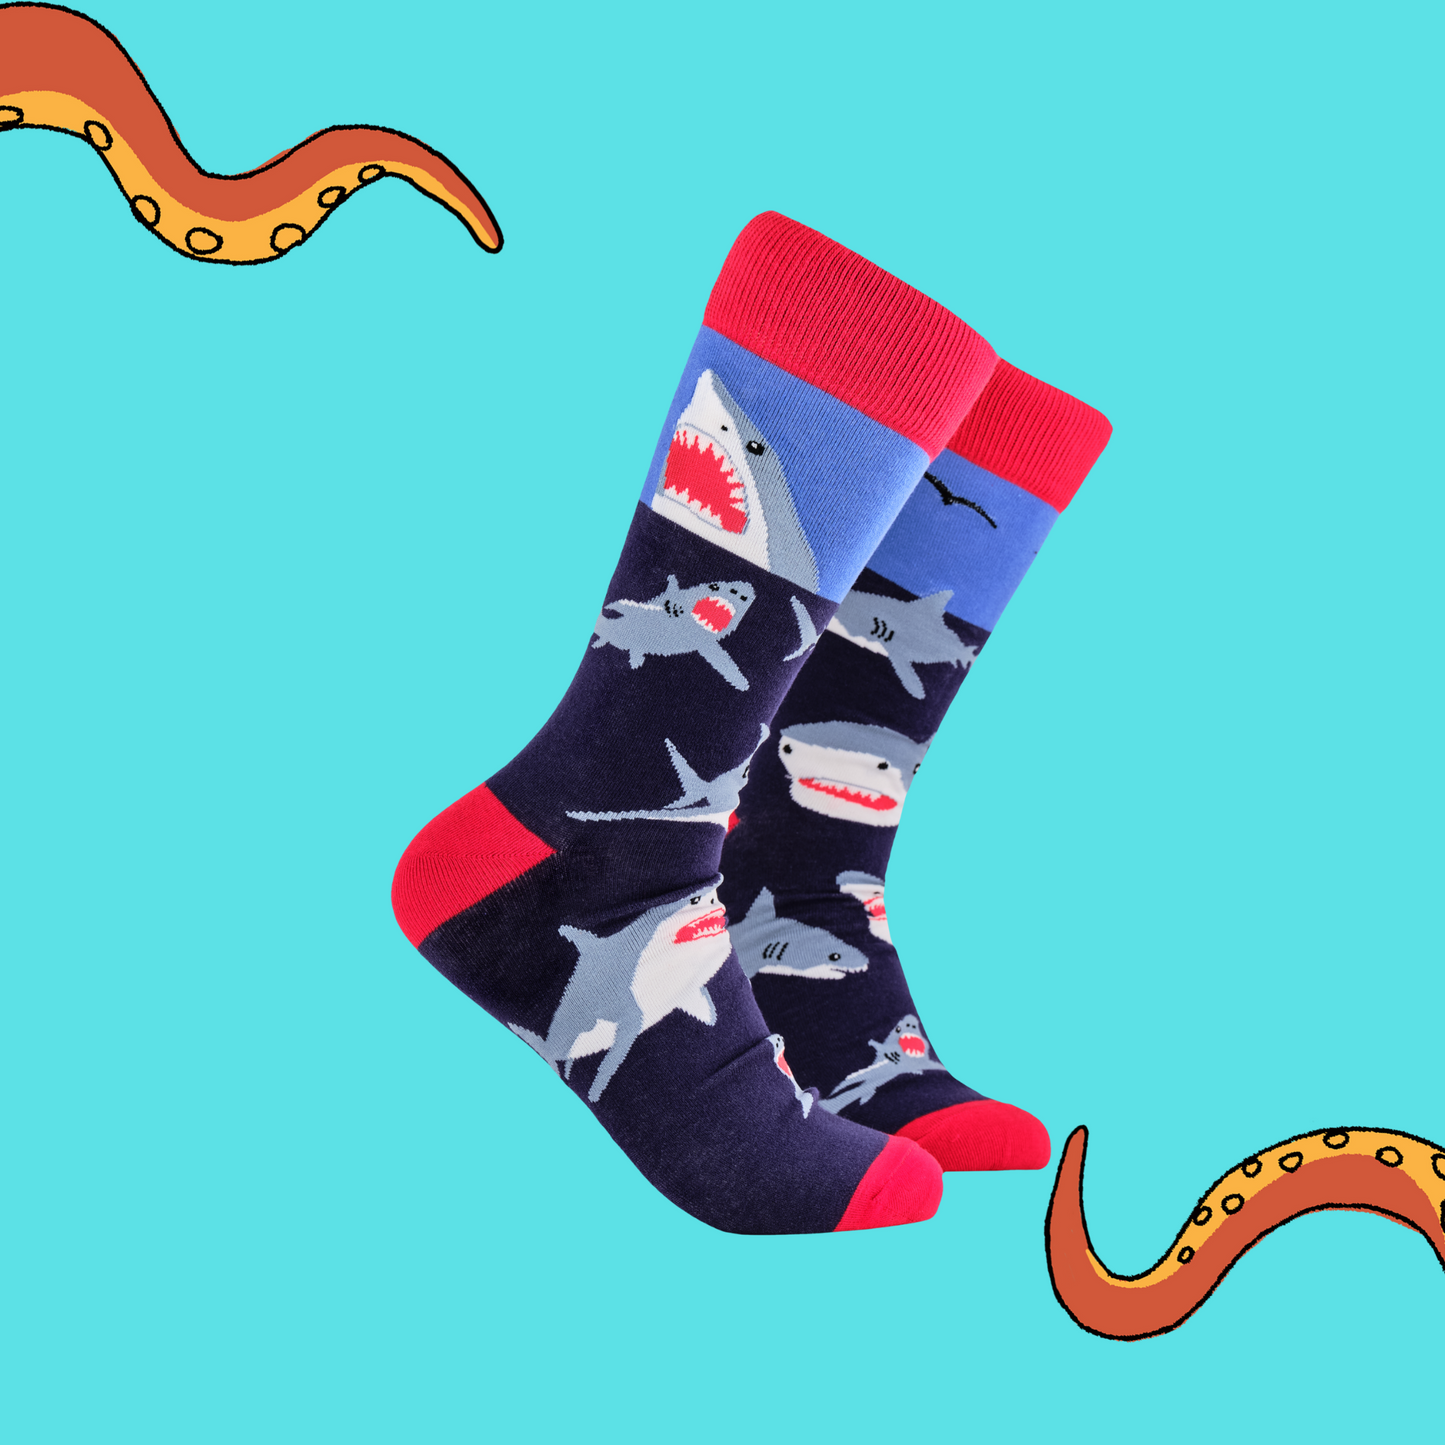 A pair of socks depicting great white sharks. Blue legs, red cuff, heel and toe.